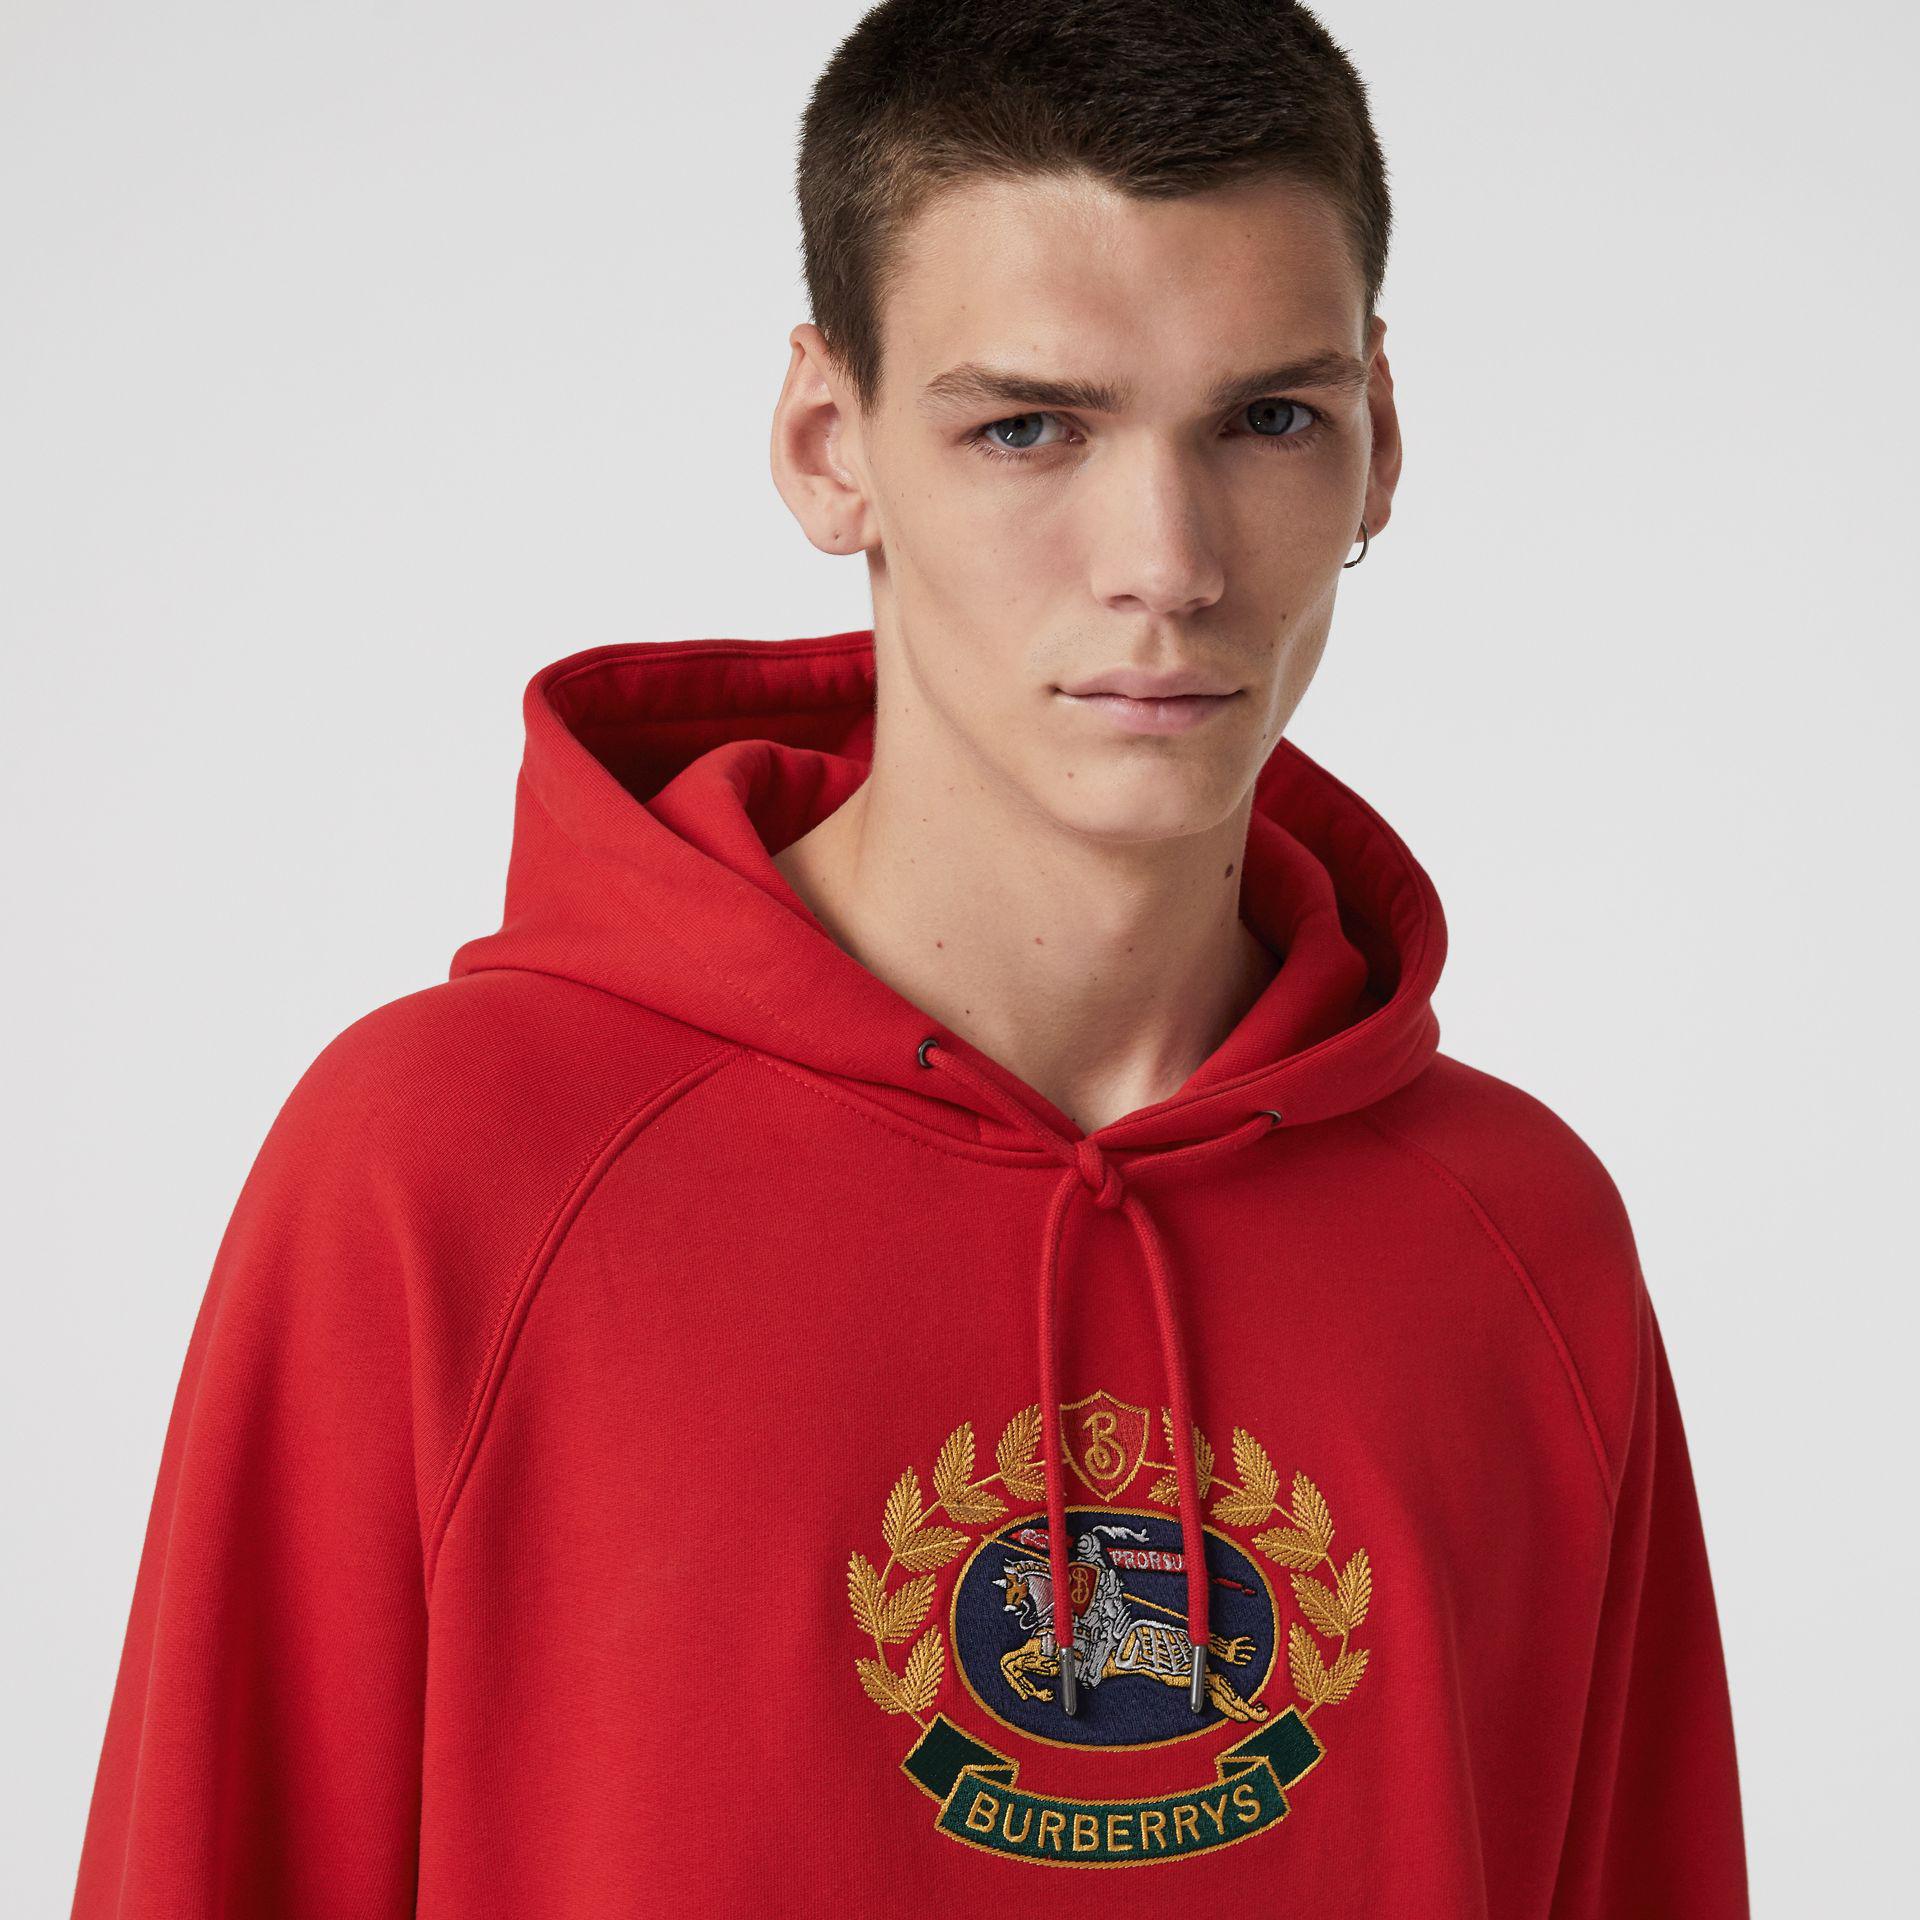 burberry embroidered crest jersey hoodie,Free delivery,album-web.org